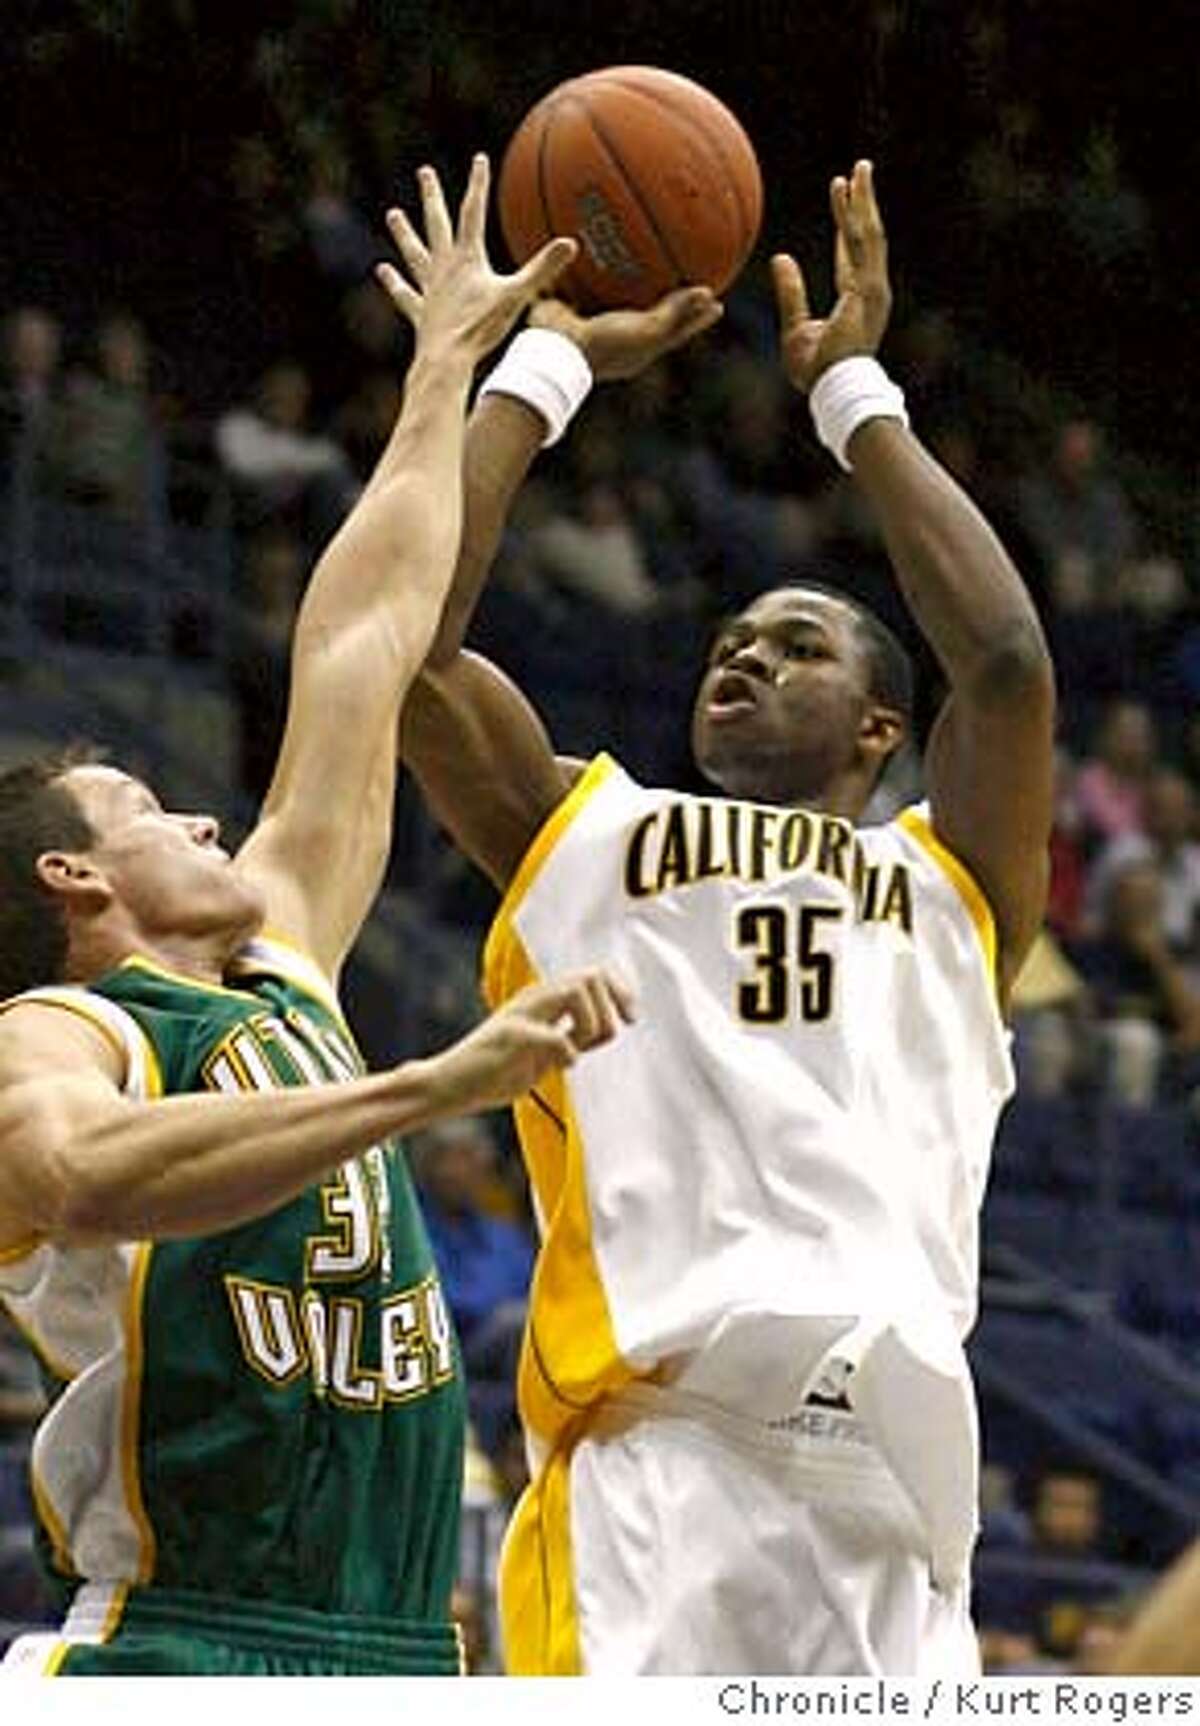 Hardin pivots back to Cal, putting off 